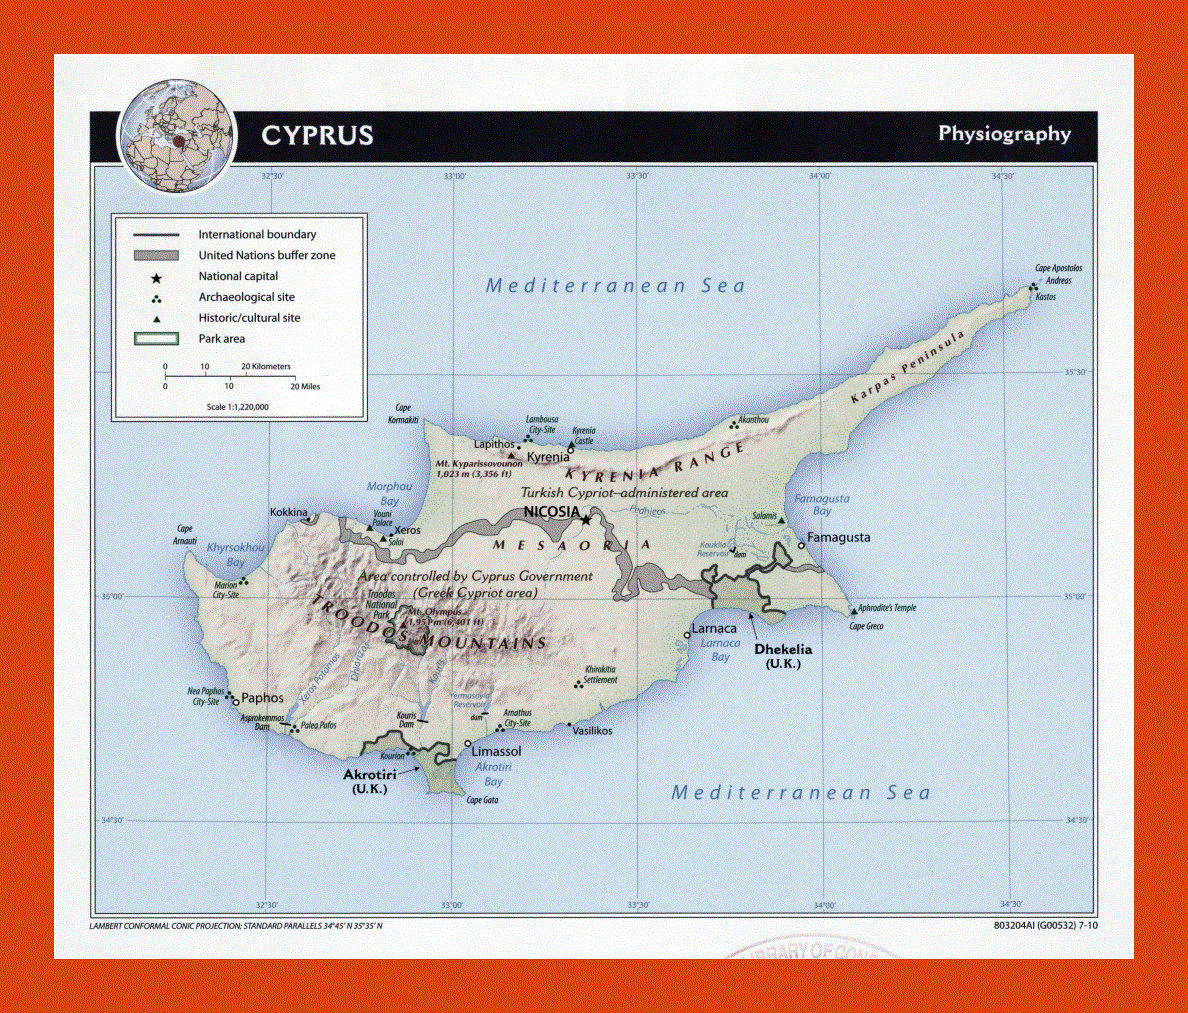 Physiography map of Cyprus - 2010